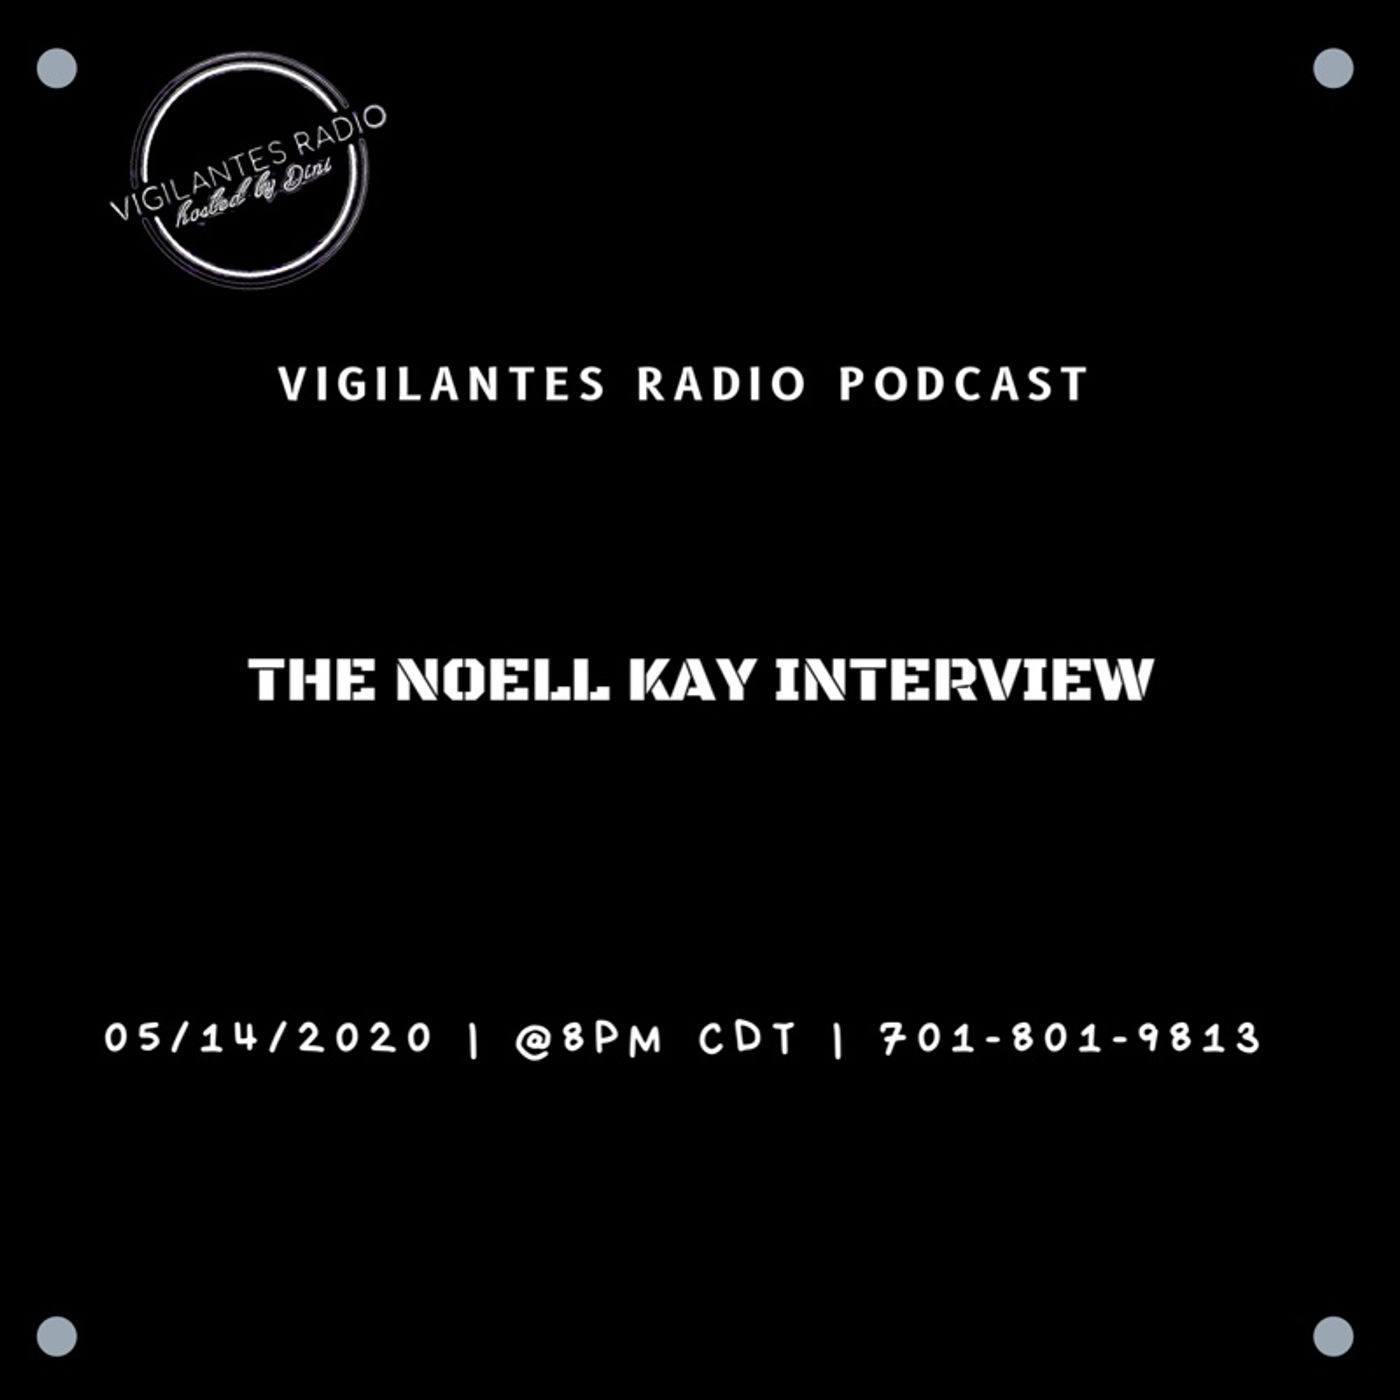 The Noell Kay Interview. Image